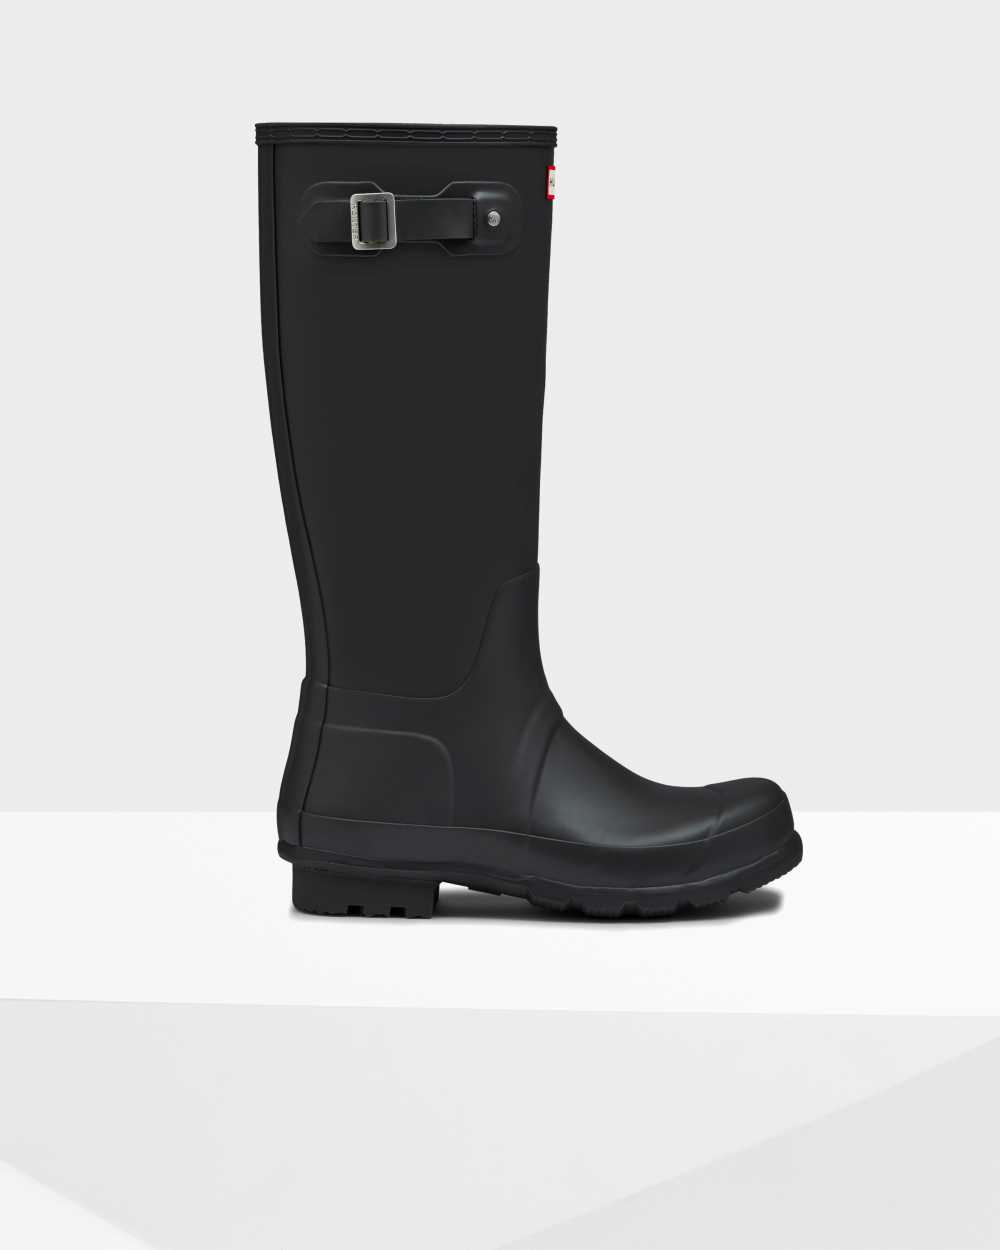 HUNTER Original Insulated Snow Ankle Wellington Boots in Black for Men Mens Shoes Boots Wellington and rain boots 